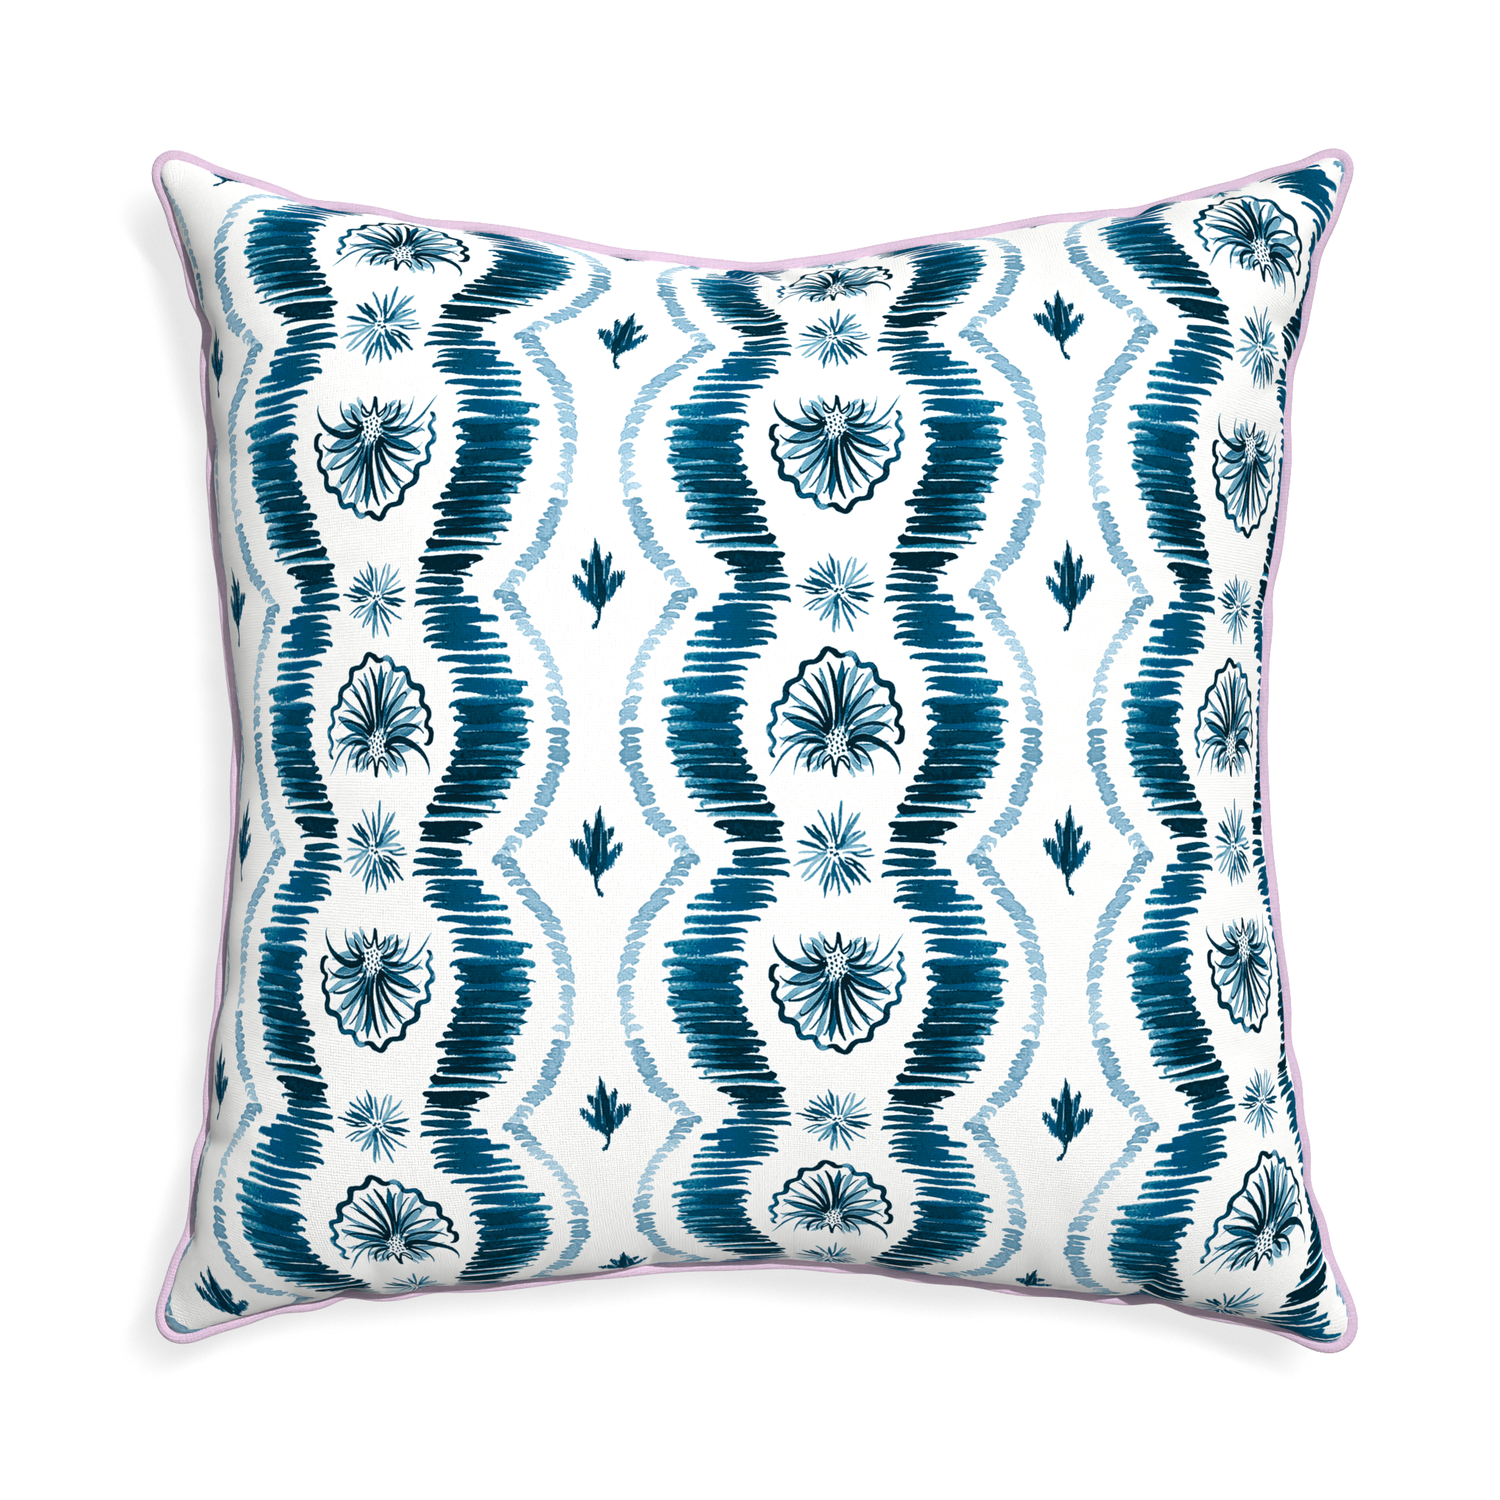 Euro-sham alice custom blue ikatpillow with l piping on white background